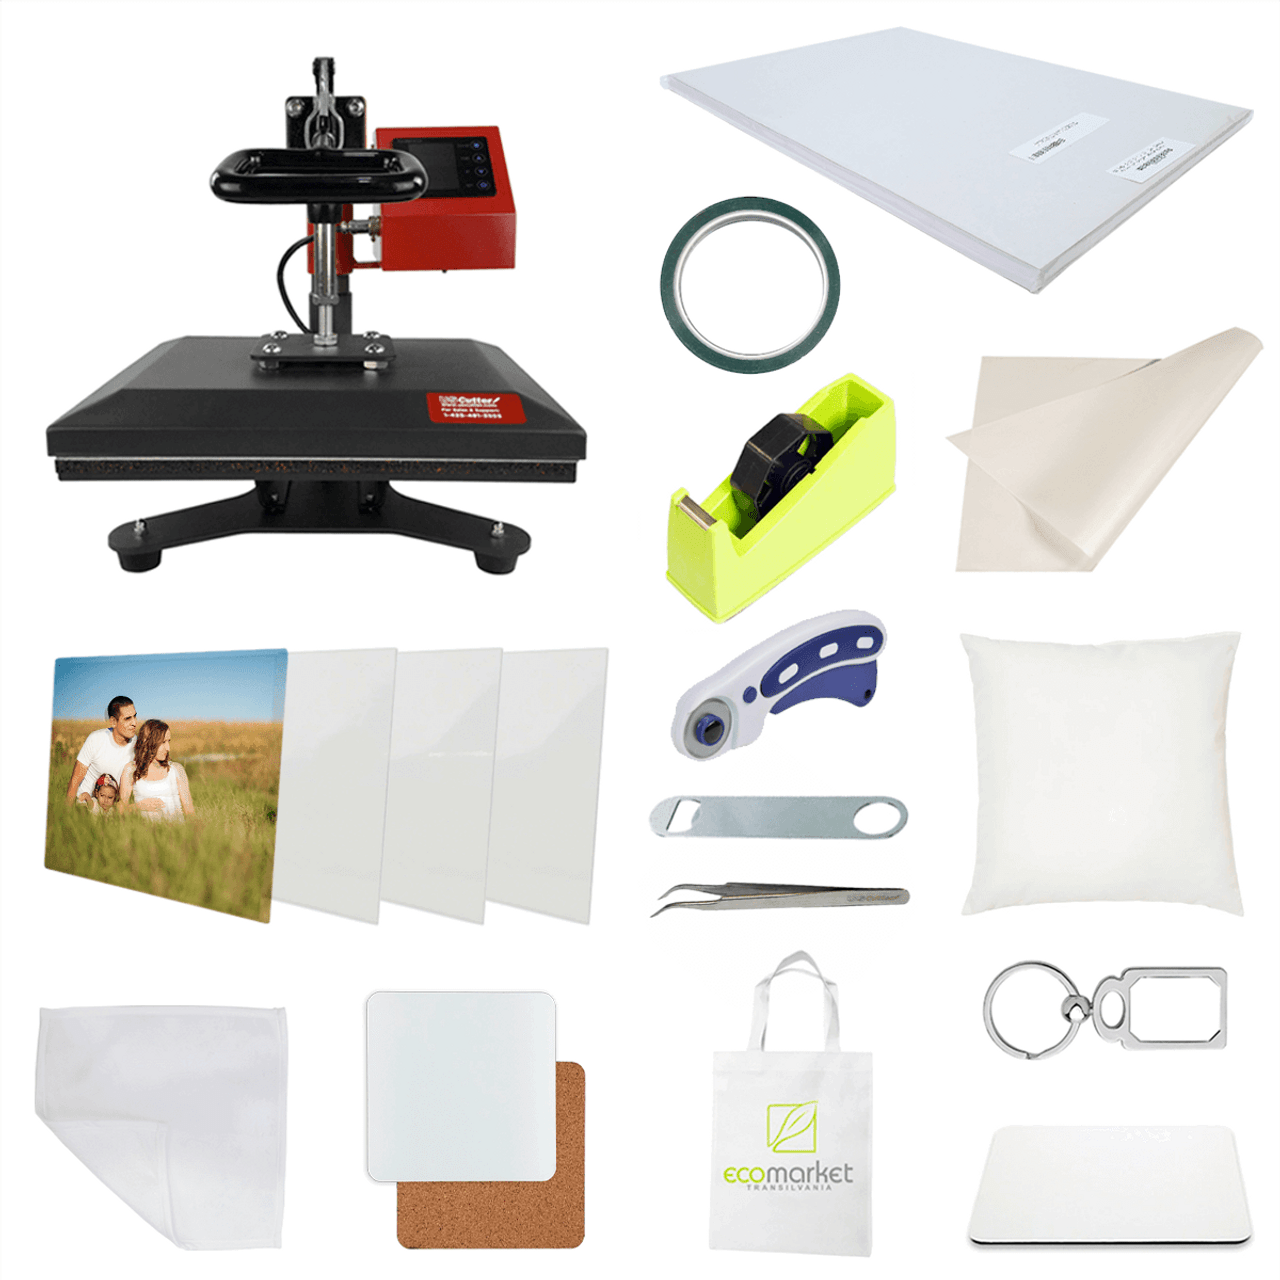 Sublimation Bundle Starter Package with heat and mug press and